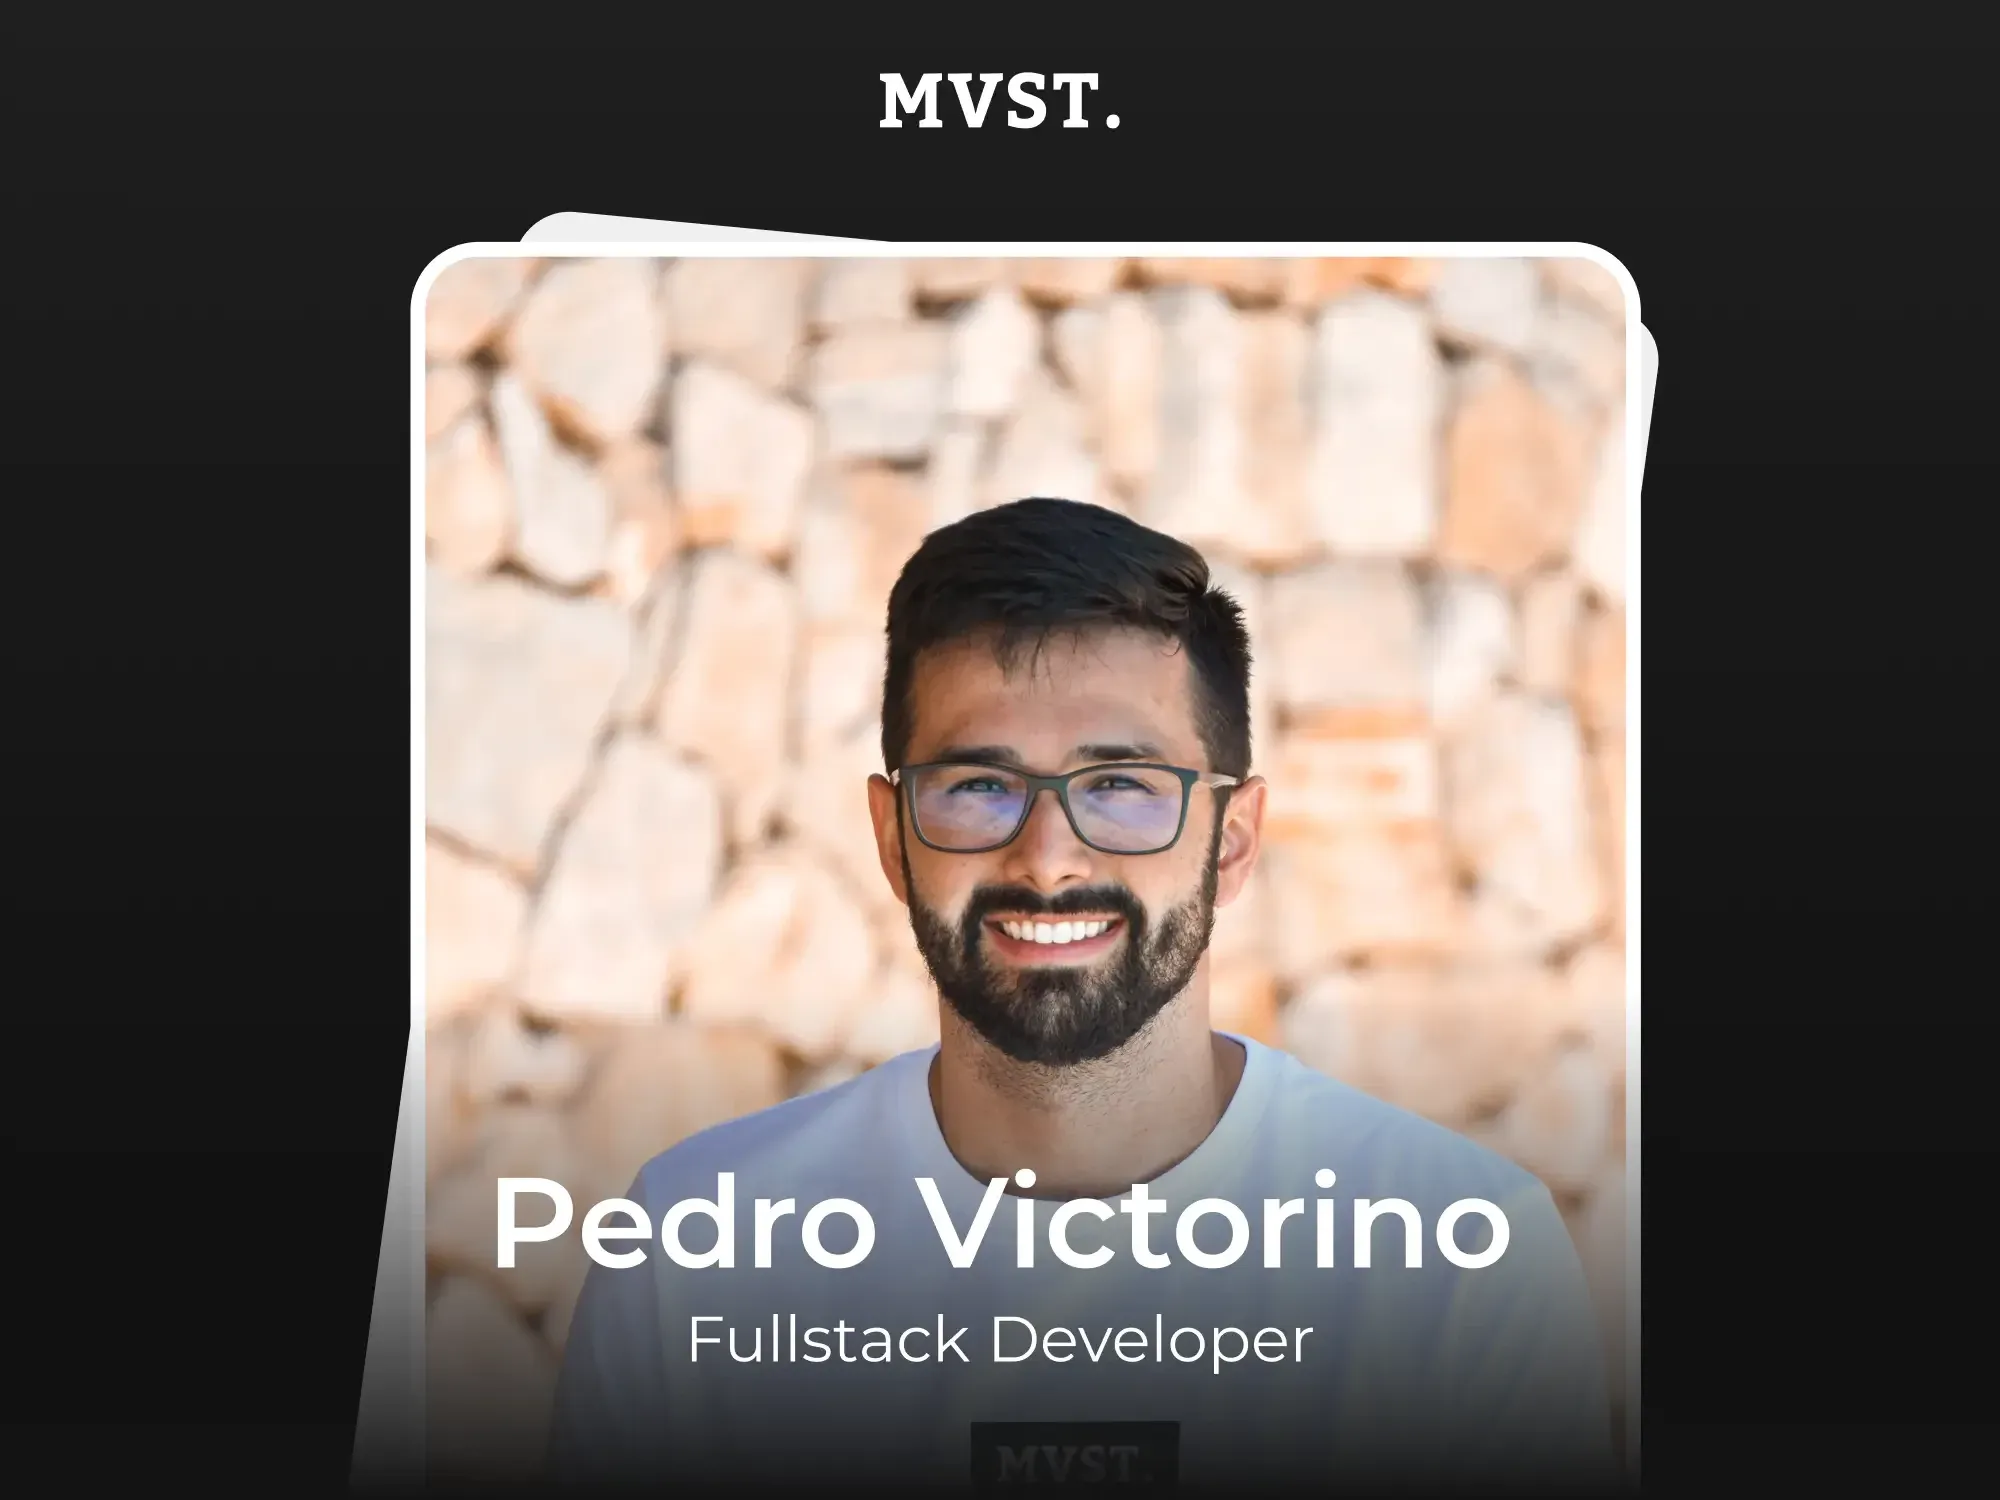 Welcome to MVST, Pedro!